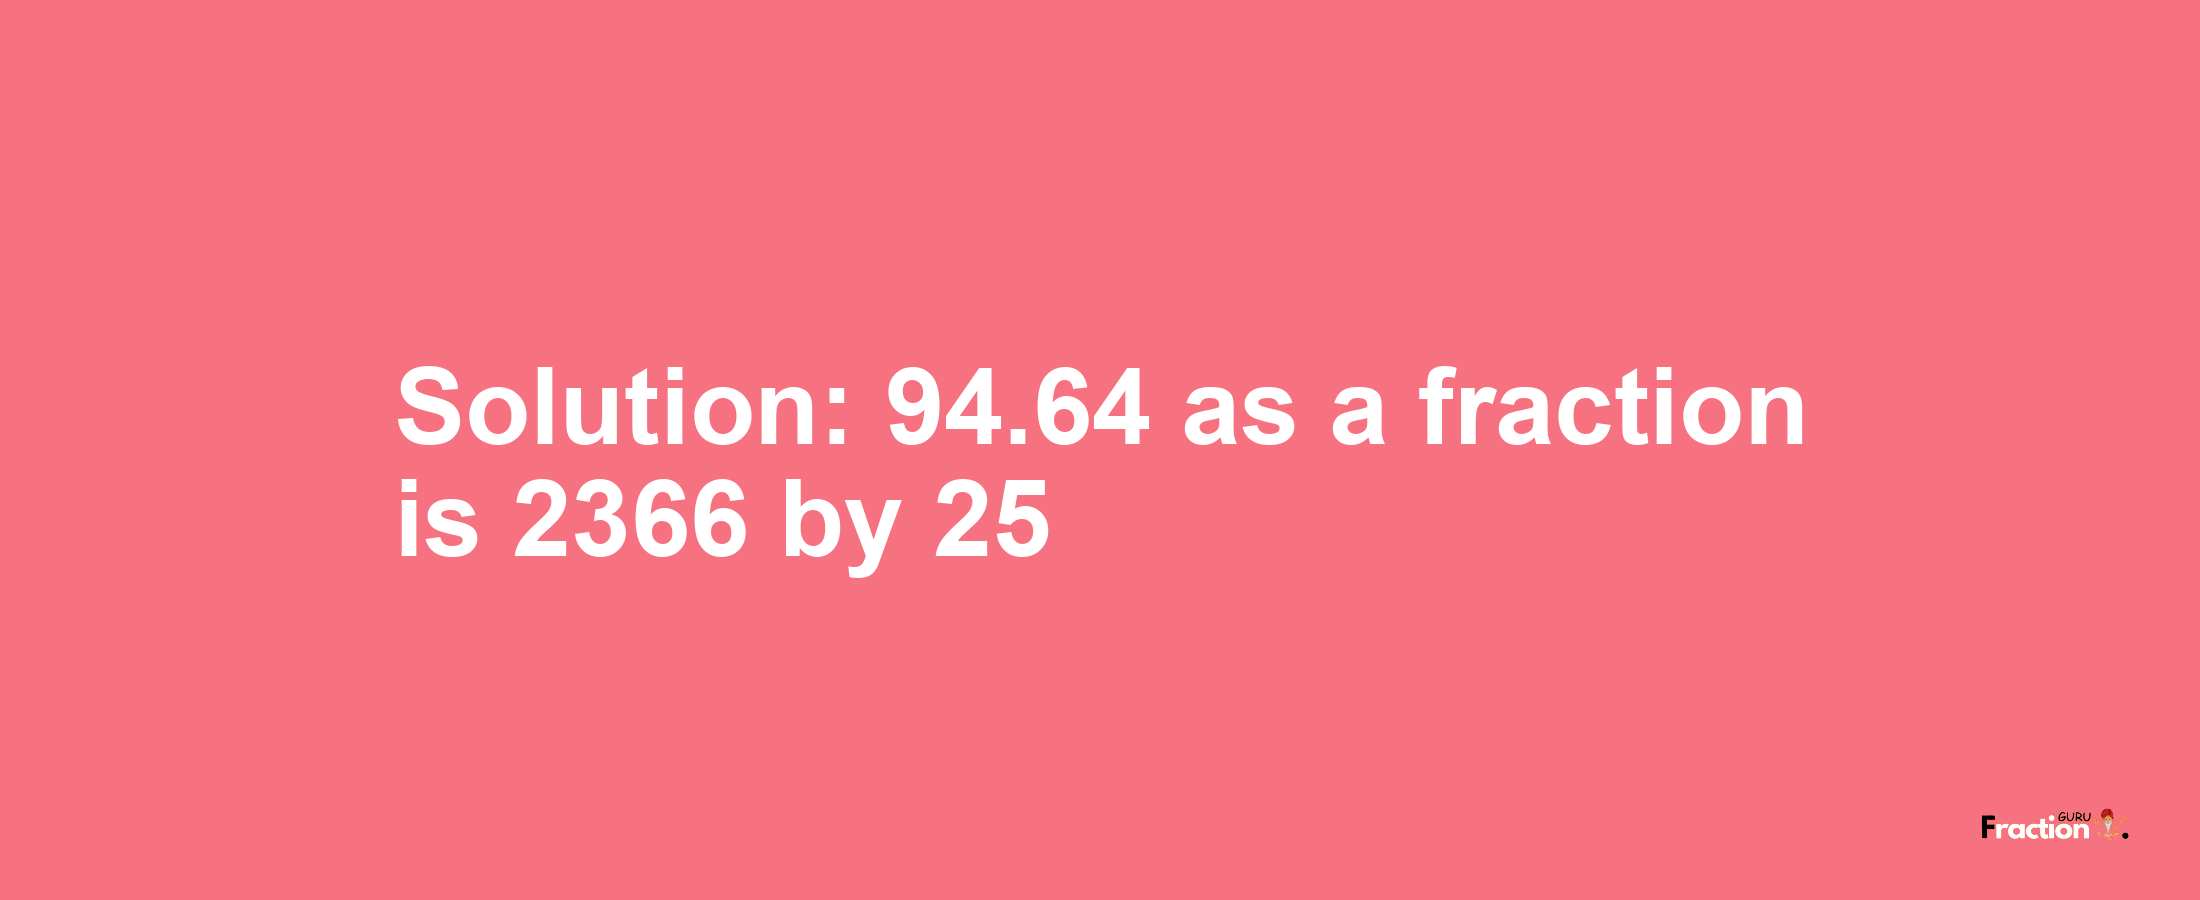 Solution:94.64 as a fraction is 2366/25